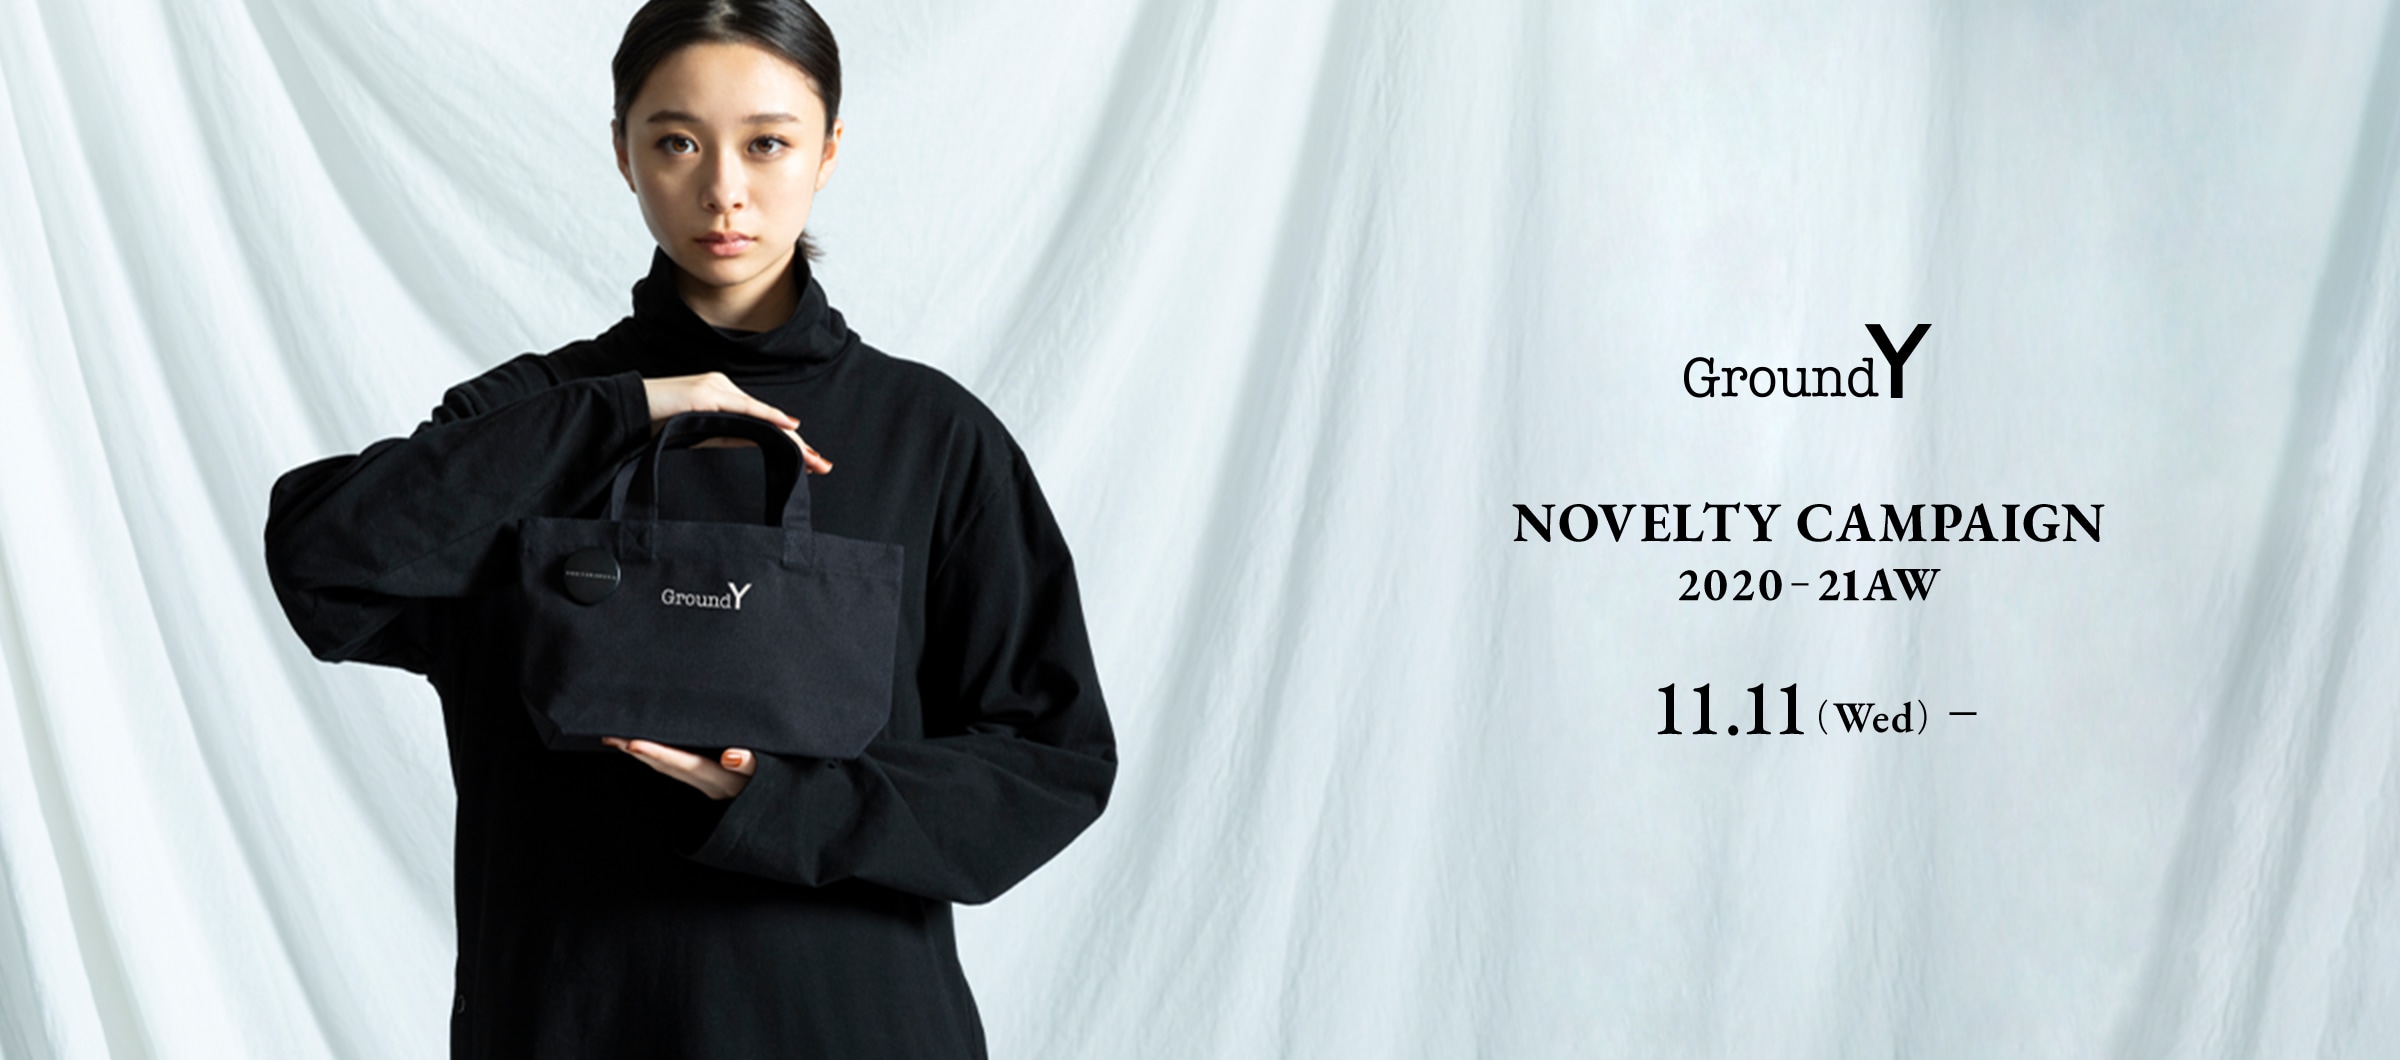 Ground Y LIMITED NOVELTY CAMPAIGN 20-21AW